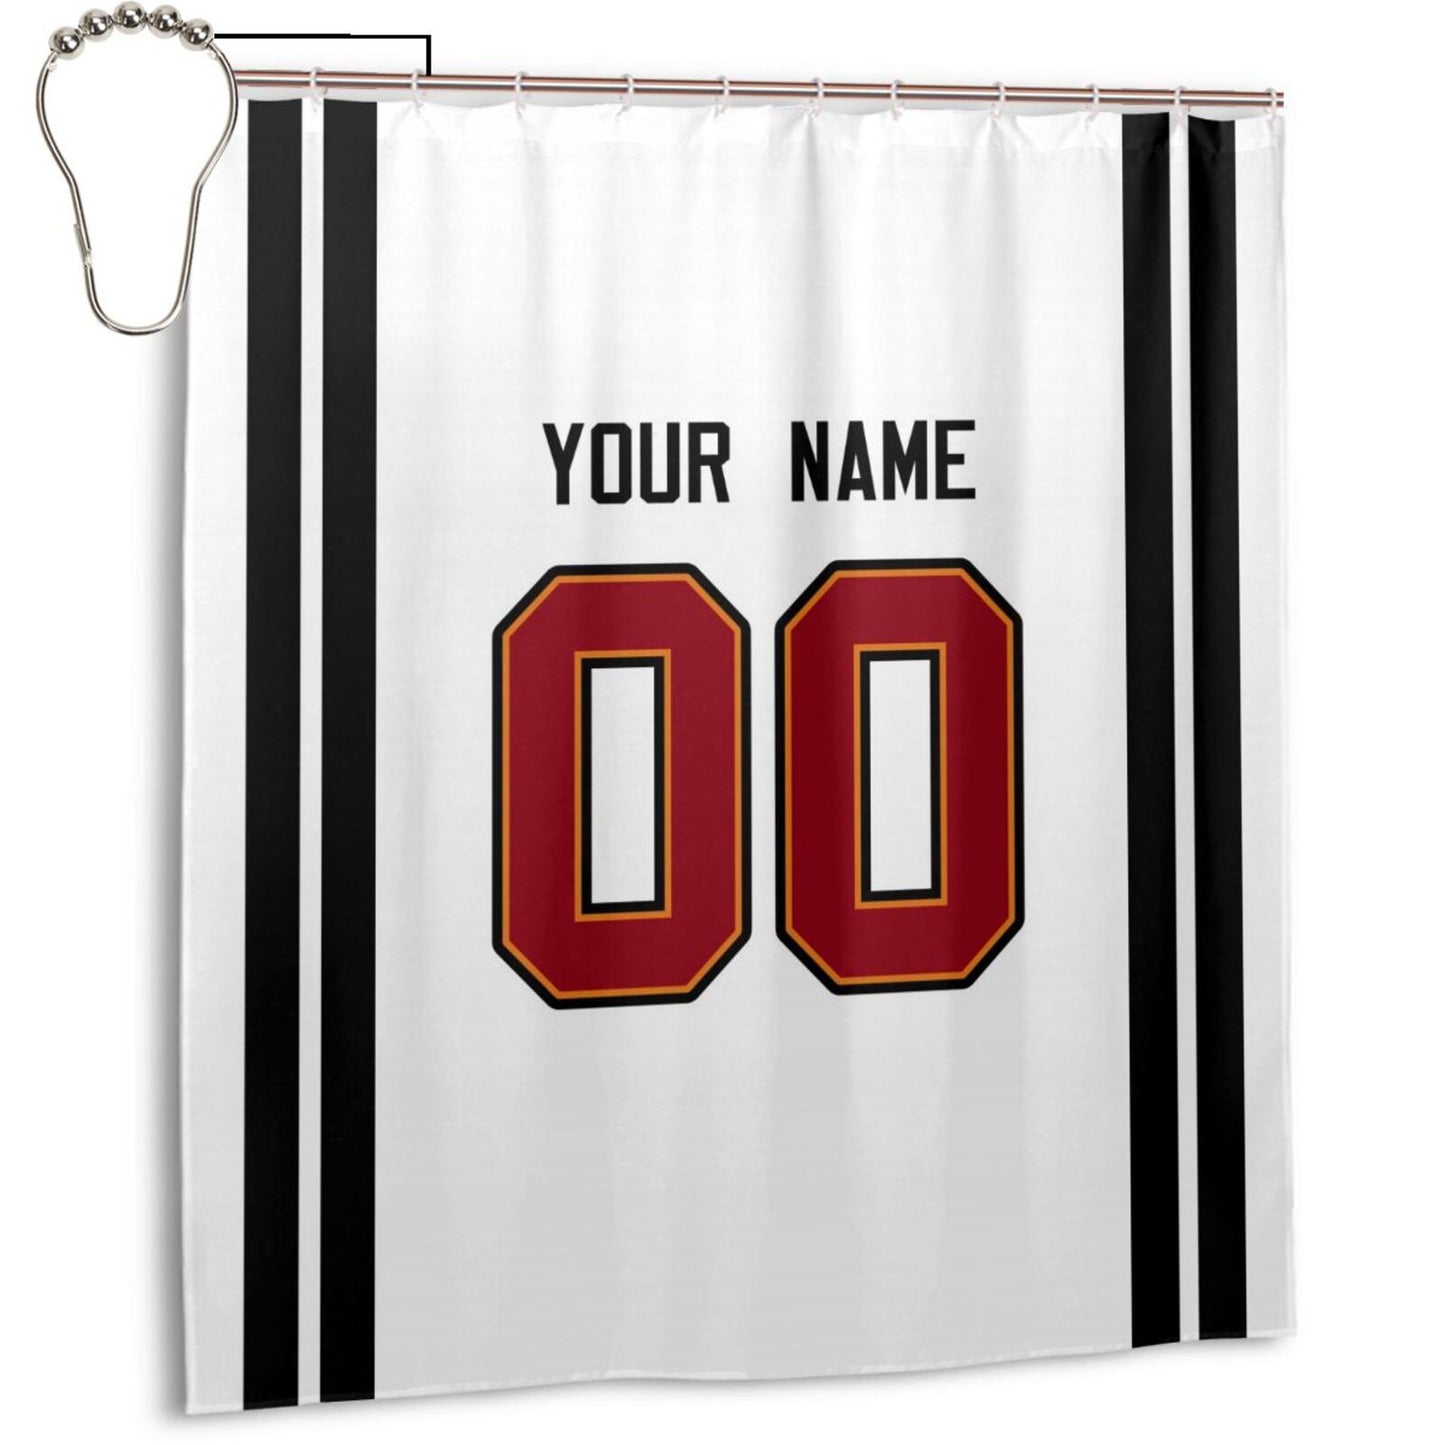 Custom Football Tampa Bay Buccaneers style personalized shower curtain custom design name and number set of 12 shower curtain hooks Rings